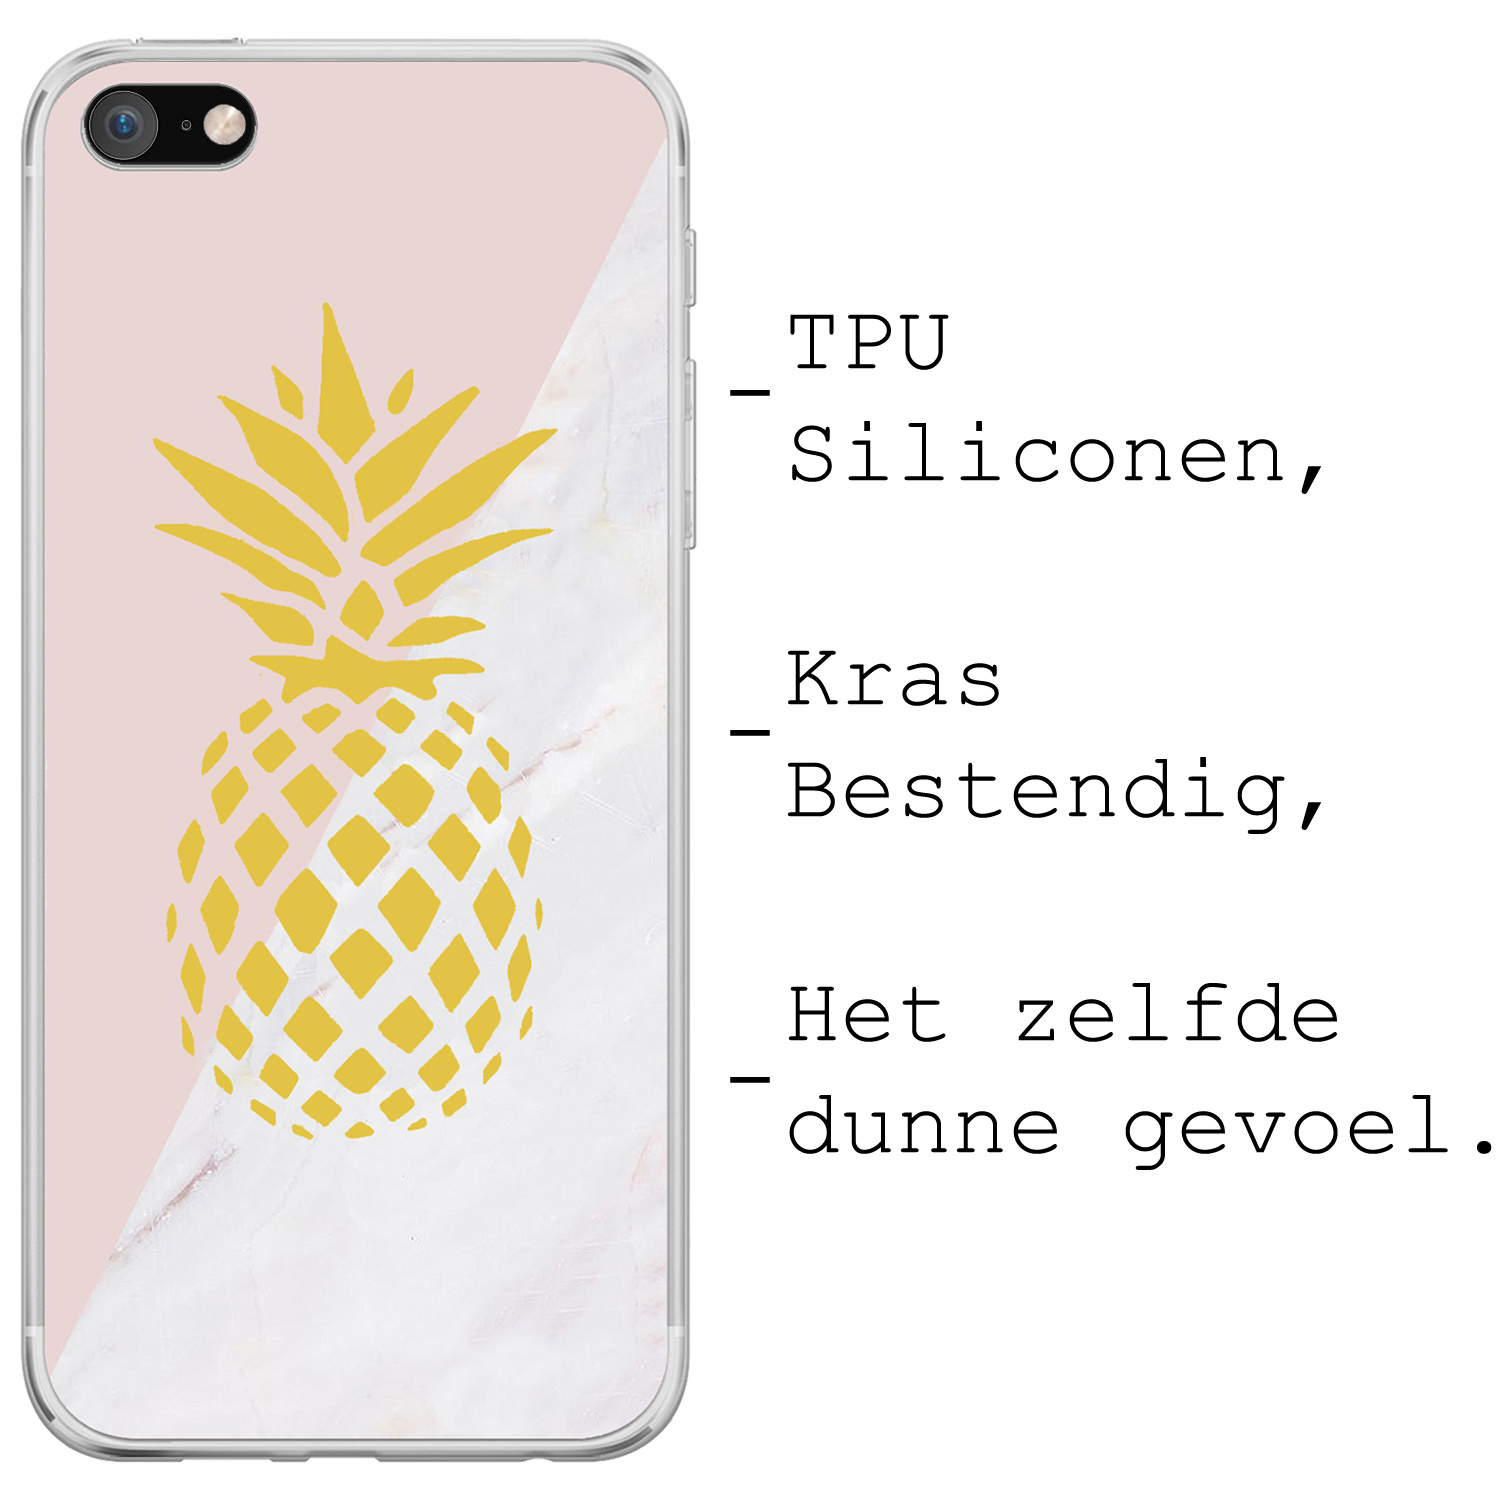 BASEY. Hoes geschikt voor iPhone SE 2020 Hoesje Siliconen Back Cover Case - iPhone SE 2020 Hoes Silicone Case Hoesje - Ananas - 2 Stuks